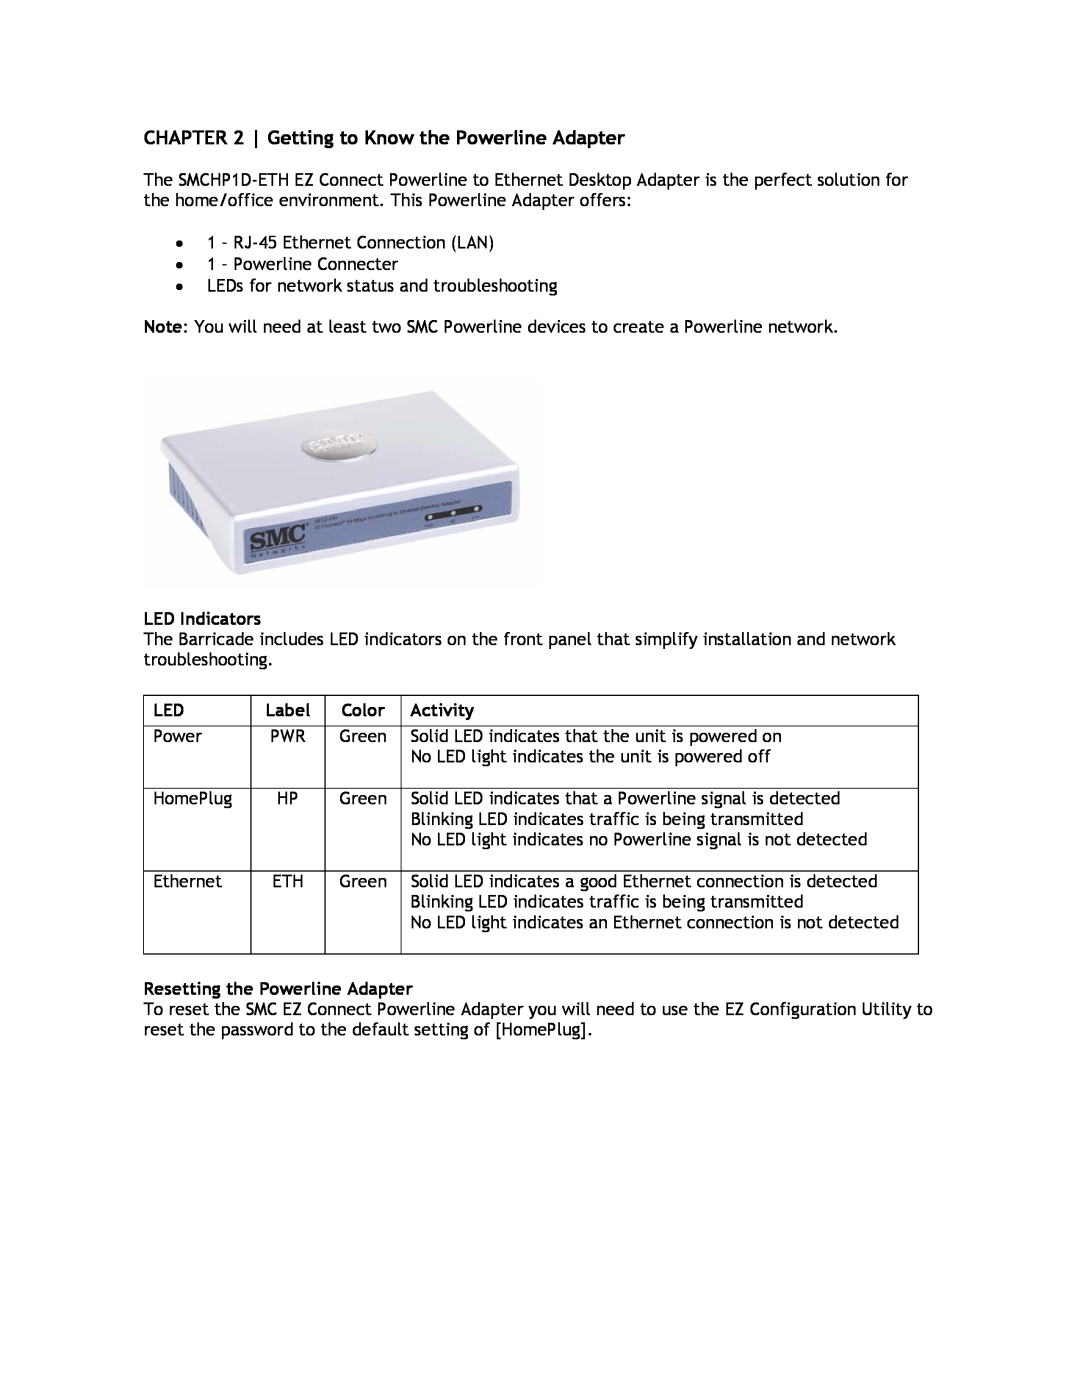 SMC Networks SMCHP1D-ETH manual Getting to Know the Powerline Adapter, LED Indicators, Label, Color, Activity 